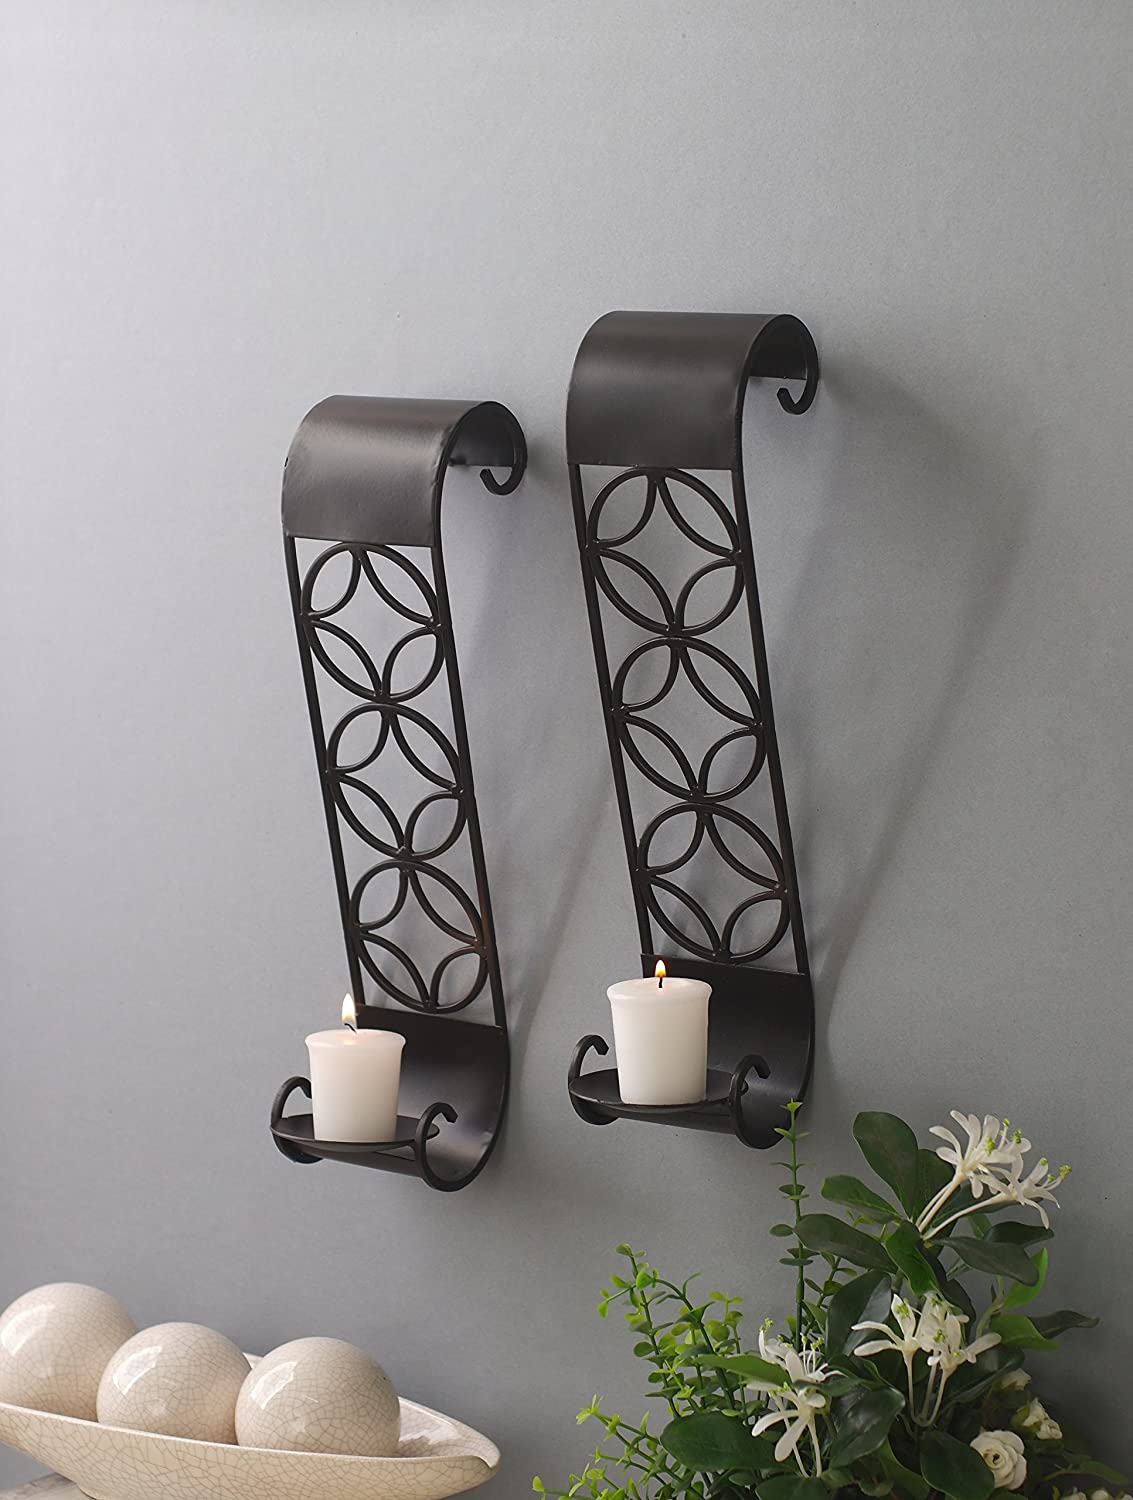 Hosley Set of 2 Wall Hanging Pillar Candle Holder Metal Wall Sconce with Pillar Candles for for Home Decoration (Set of 2)